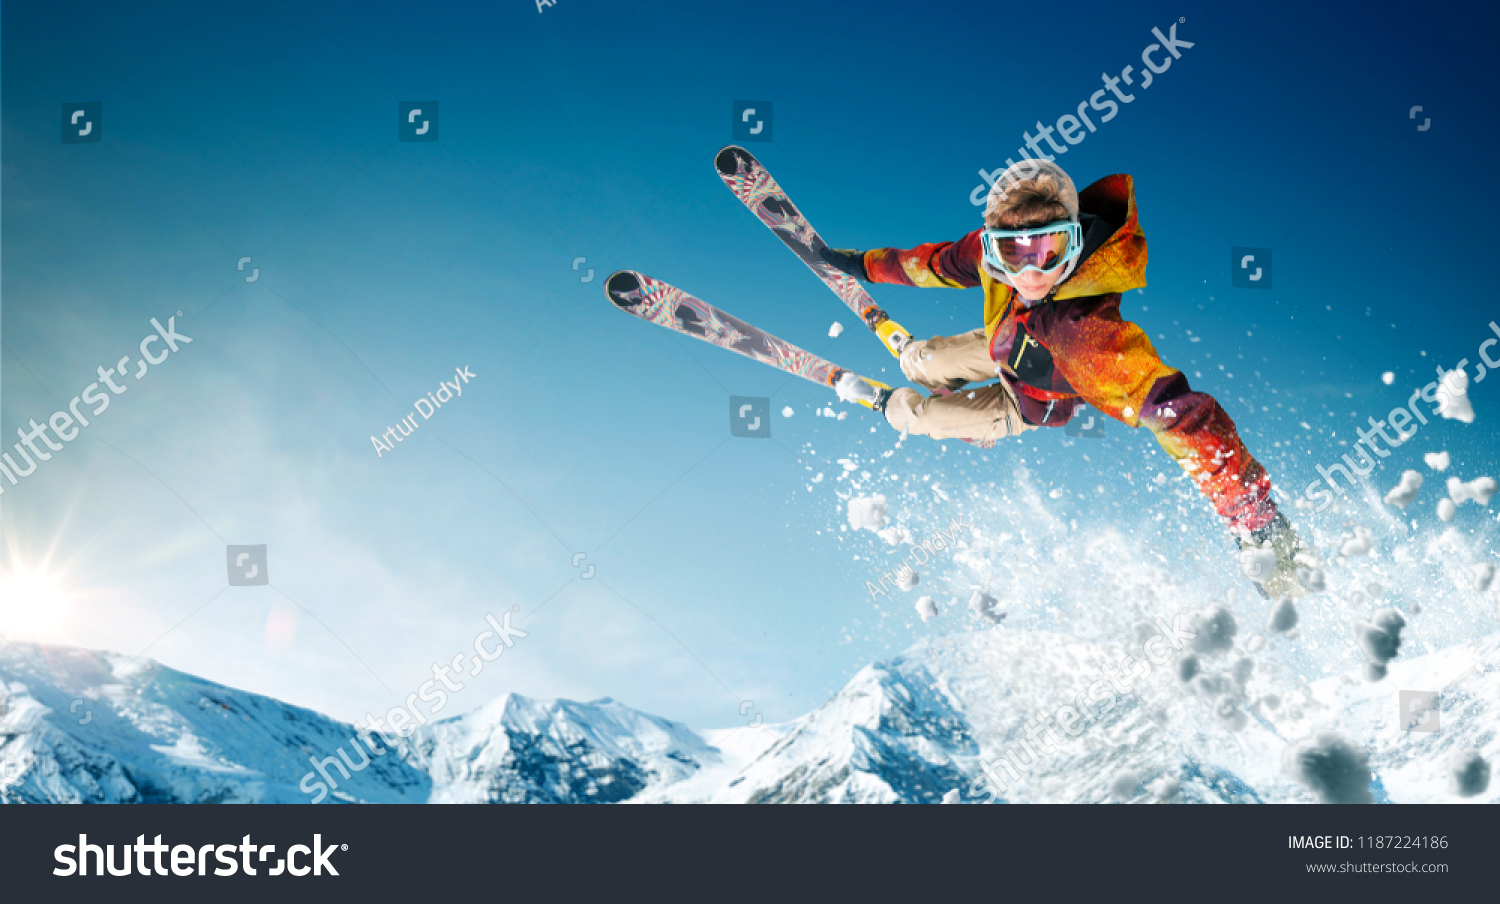 Skiing. Jumping skier. Extreme winter sports. #1187224186